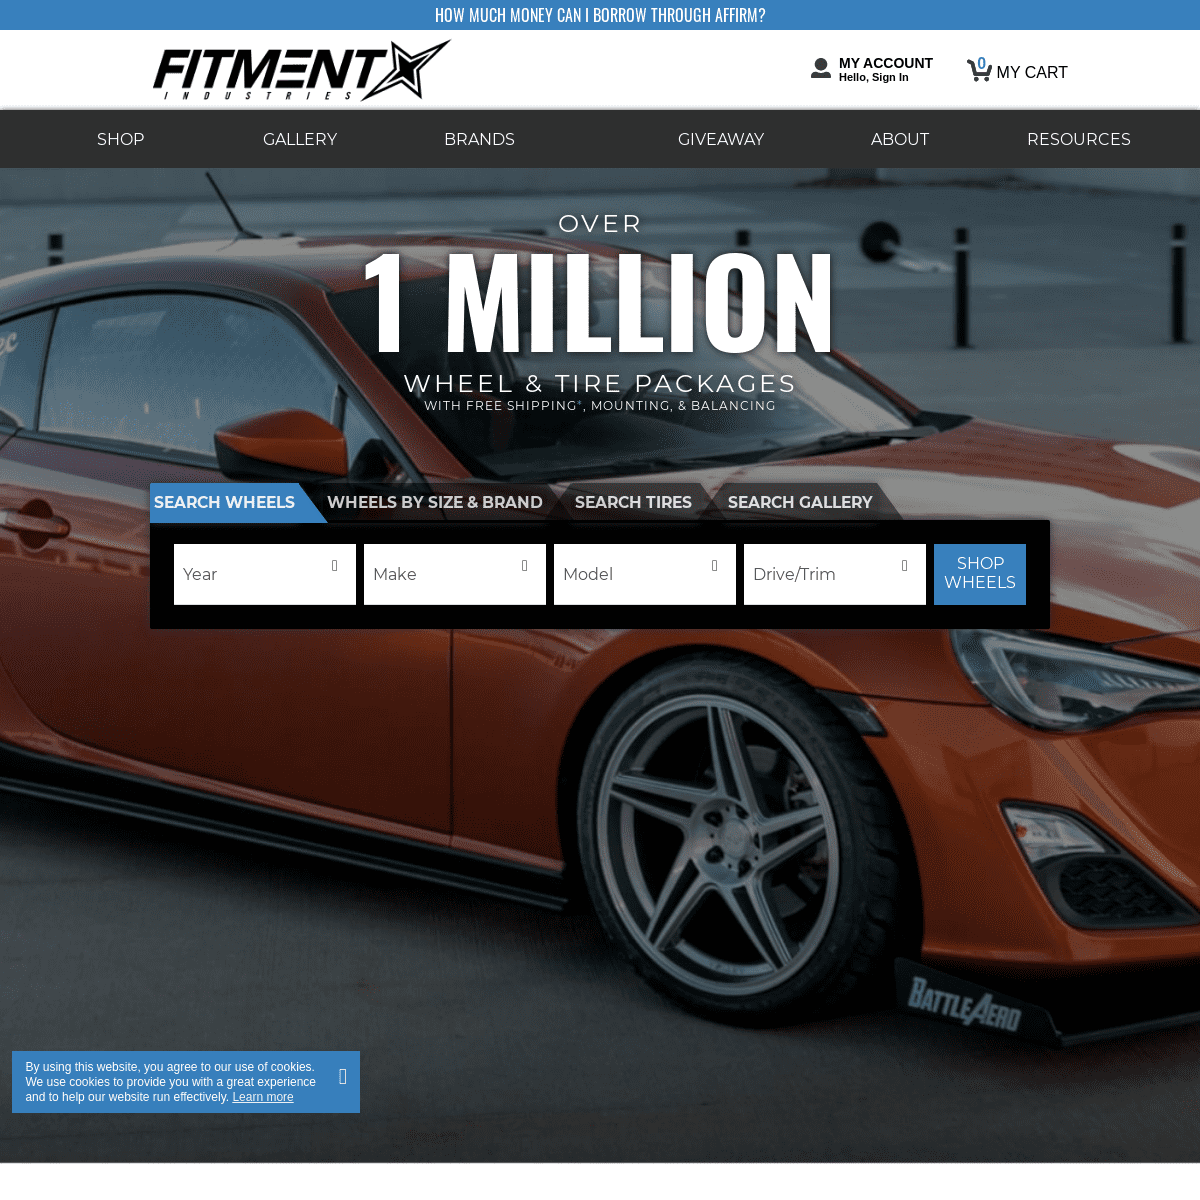 A complete backup of https://fitmentindustries.com